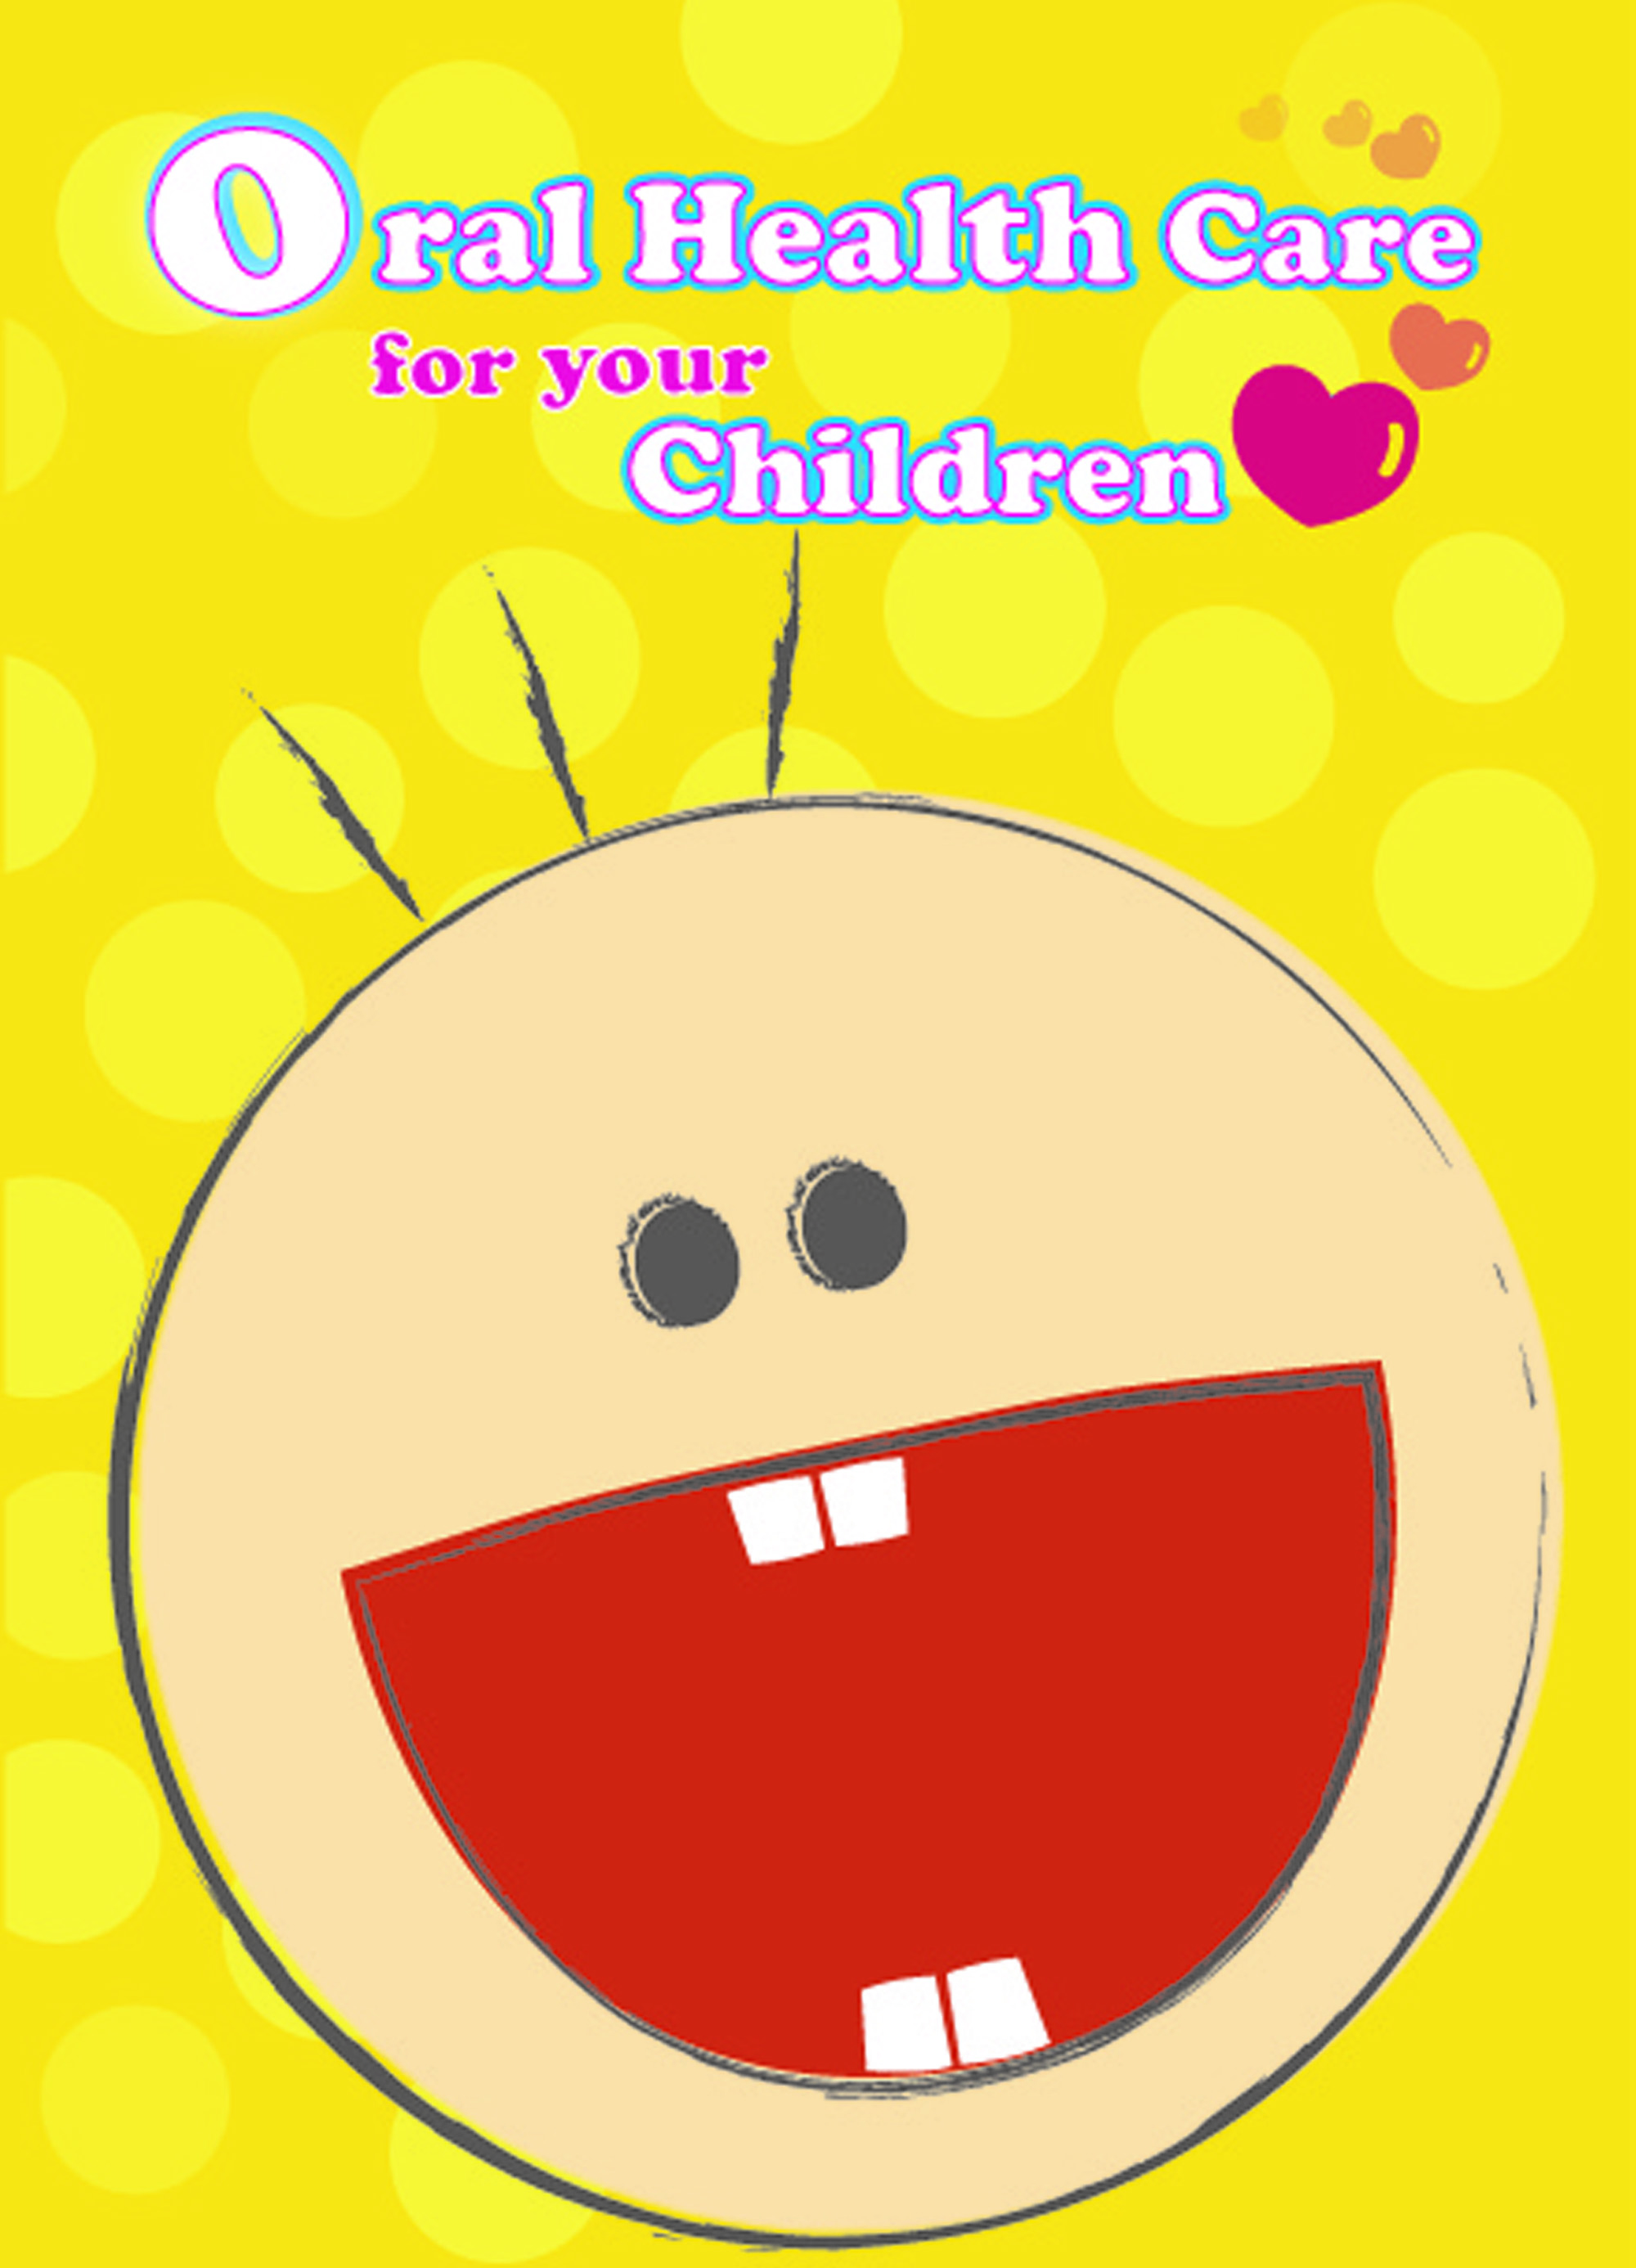 Oral Health Care for your Children ( Cover page)